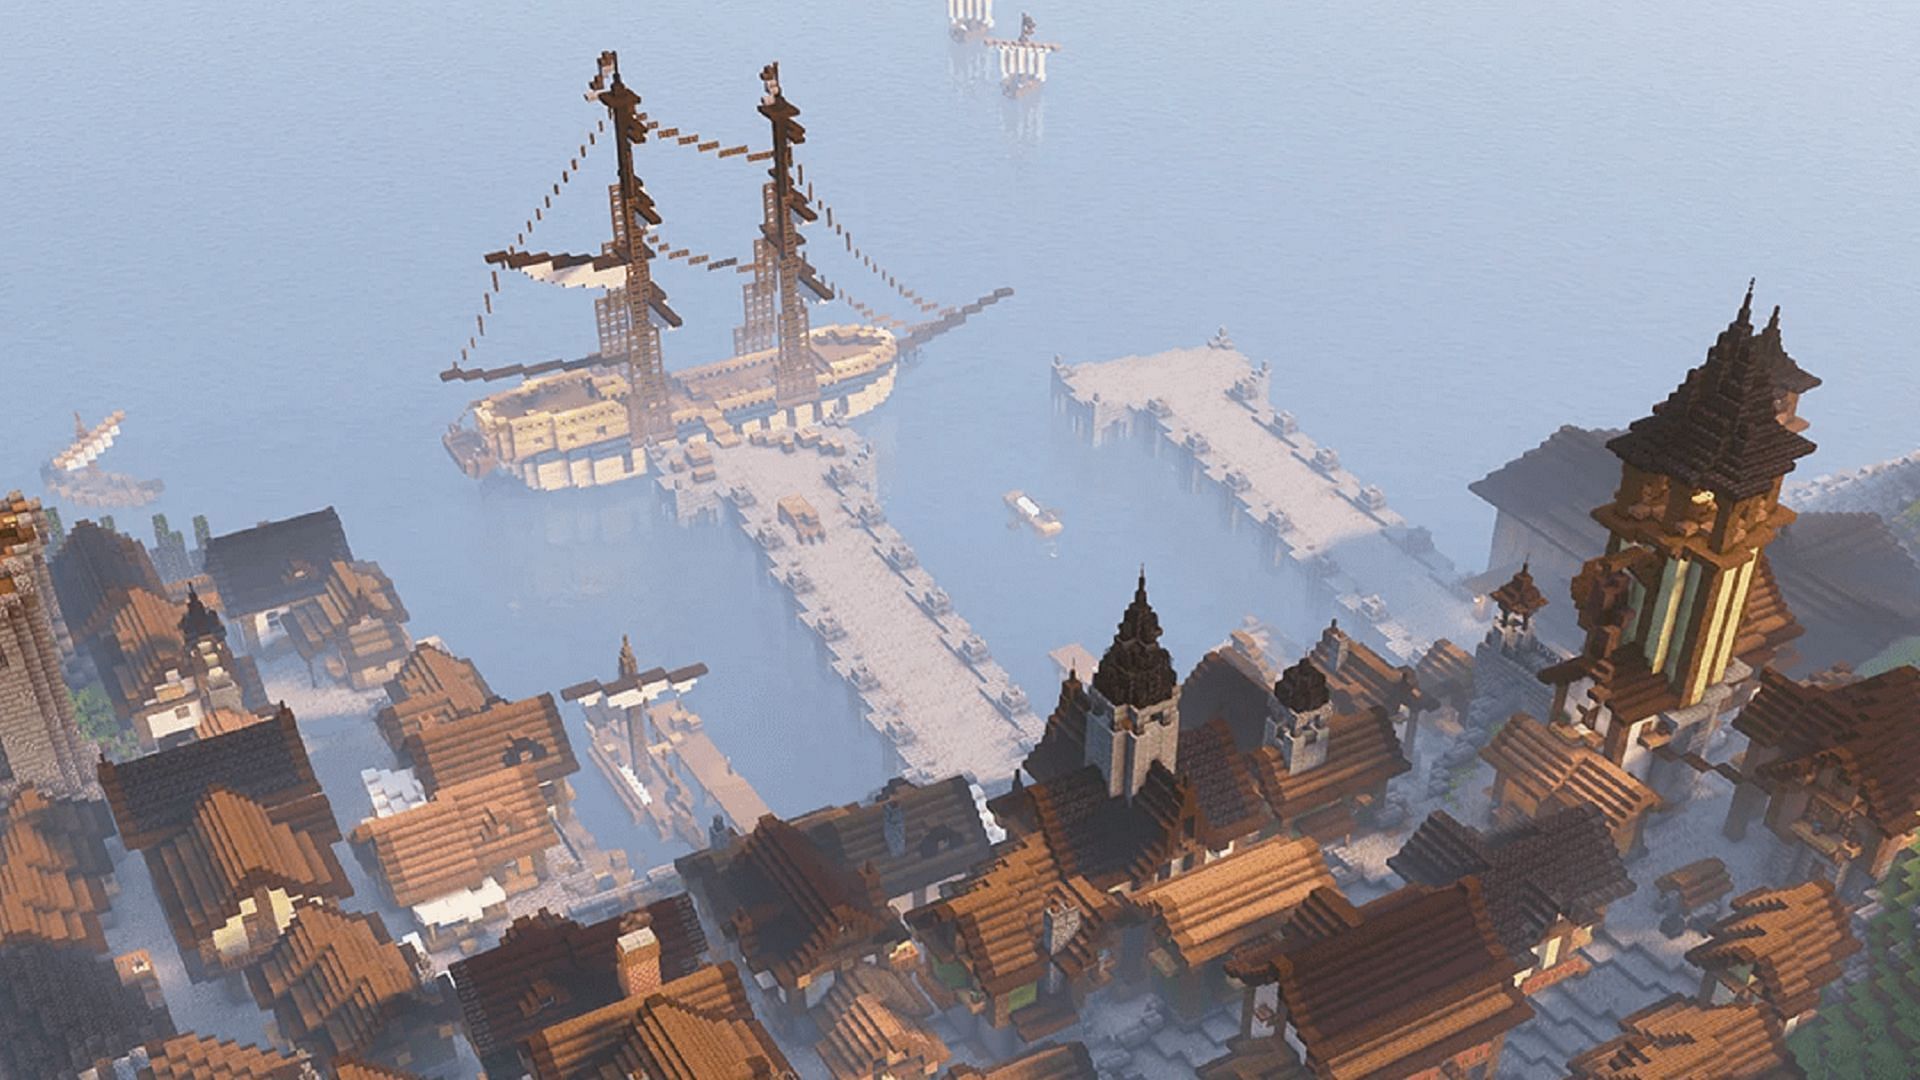 The port town within the medieval kingdom build (Image via Pixelbiesterofficial/Reddit)